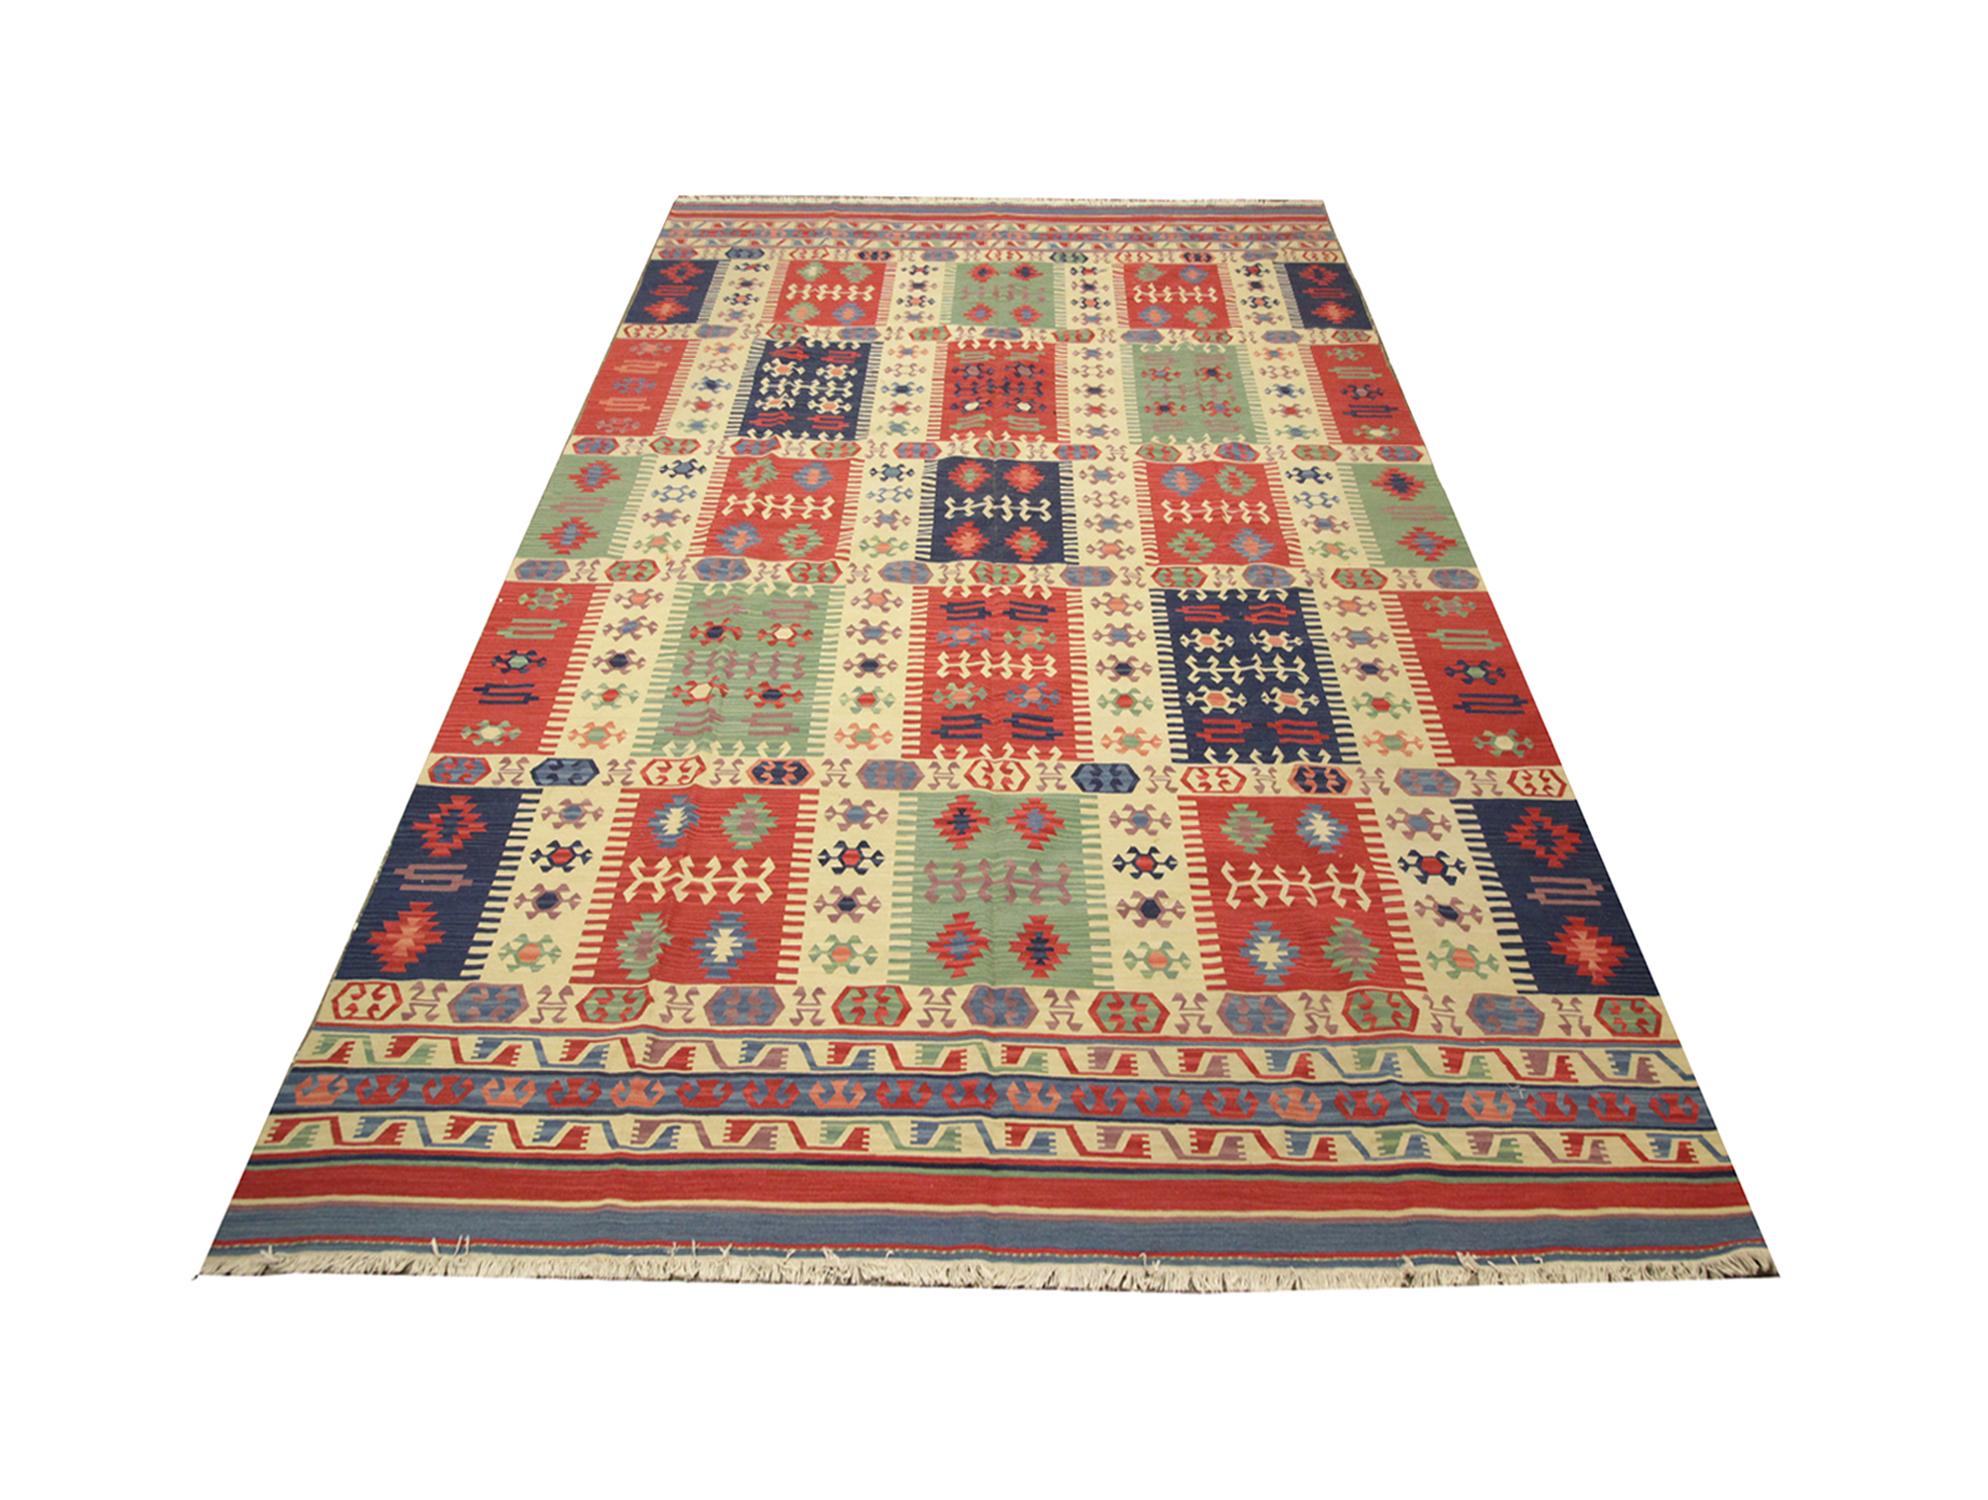 These handmade carpet natural rugs are handmade carpet using high-quality wool and cotton. These colourful rugs are woven in Afghanistan. This oriental rug has purple, red, orange, yellow, pink, white and green colours. Afghan rugs would complement